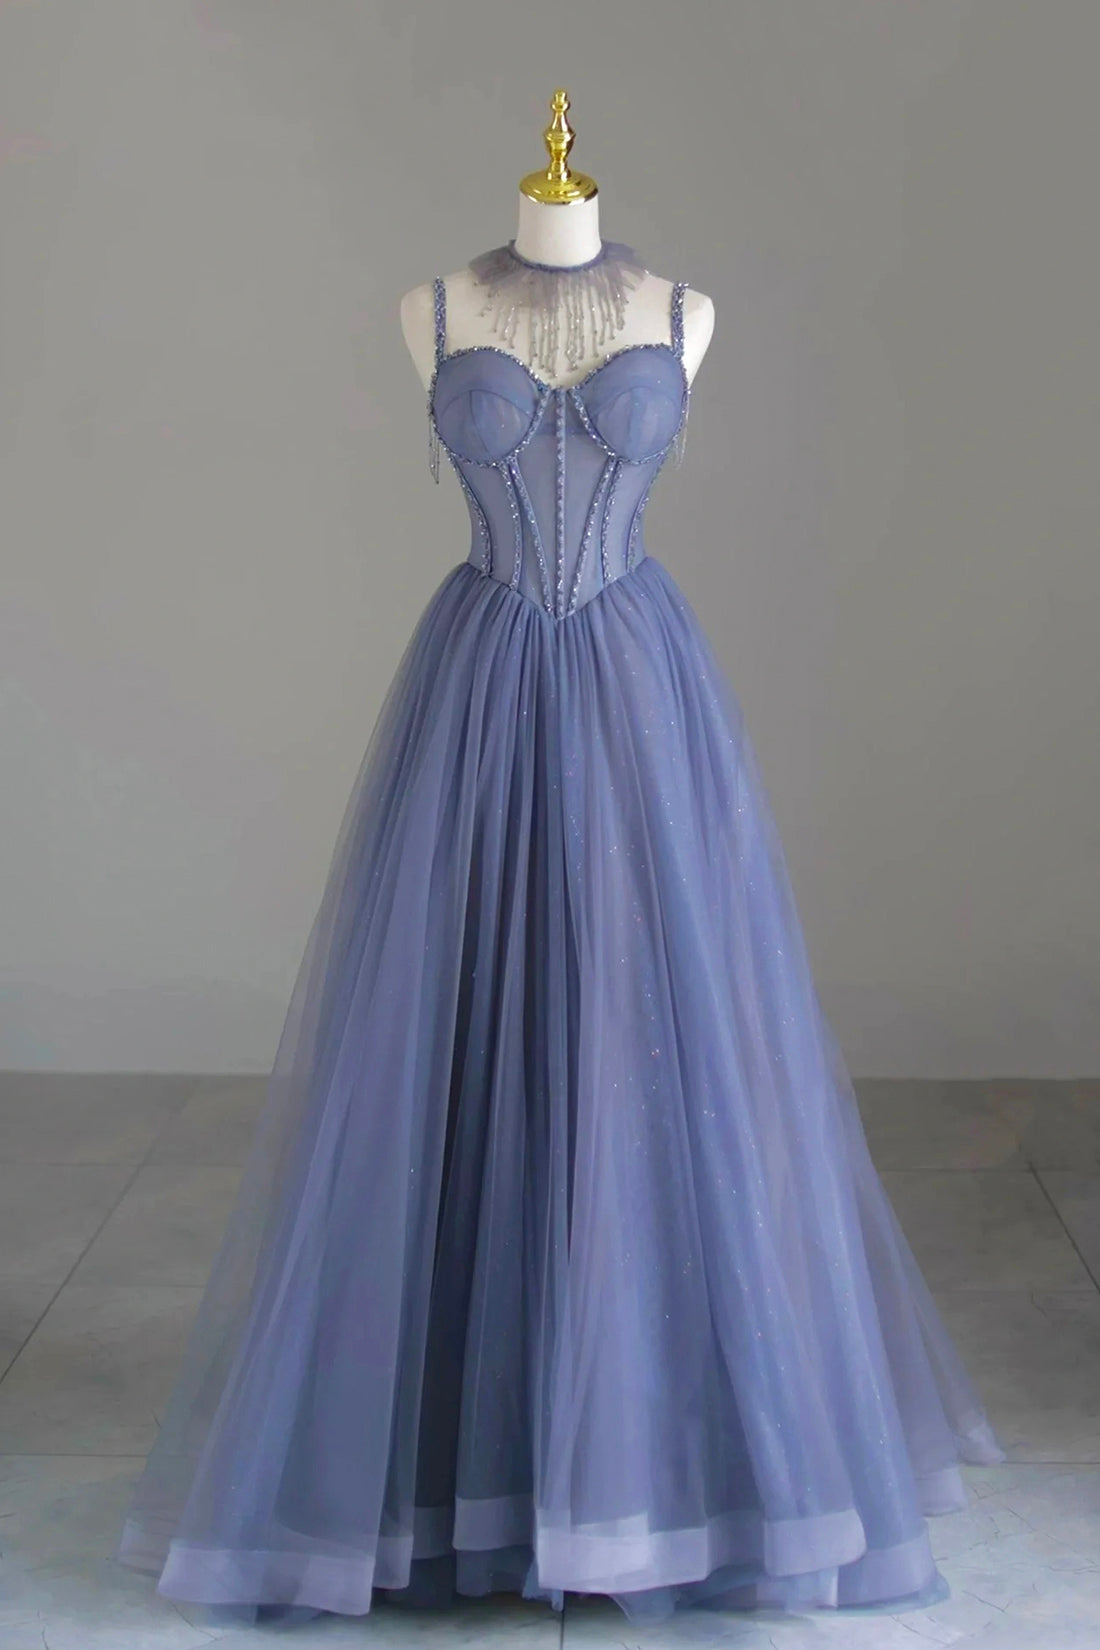 Blue Spaghetti Strap Tulle Beaded Long Prom Dress, Beautiful A-Line Evening Party Dress